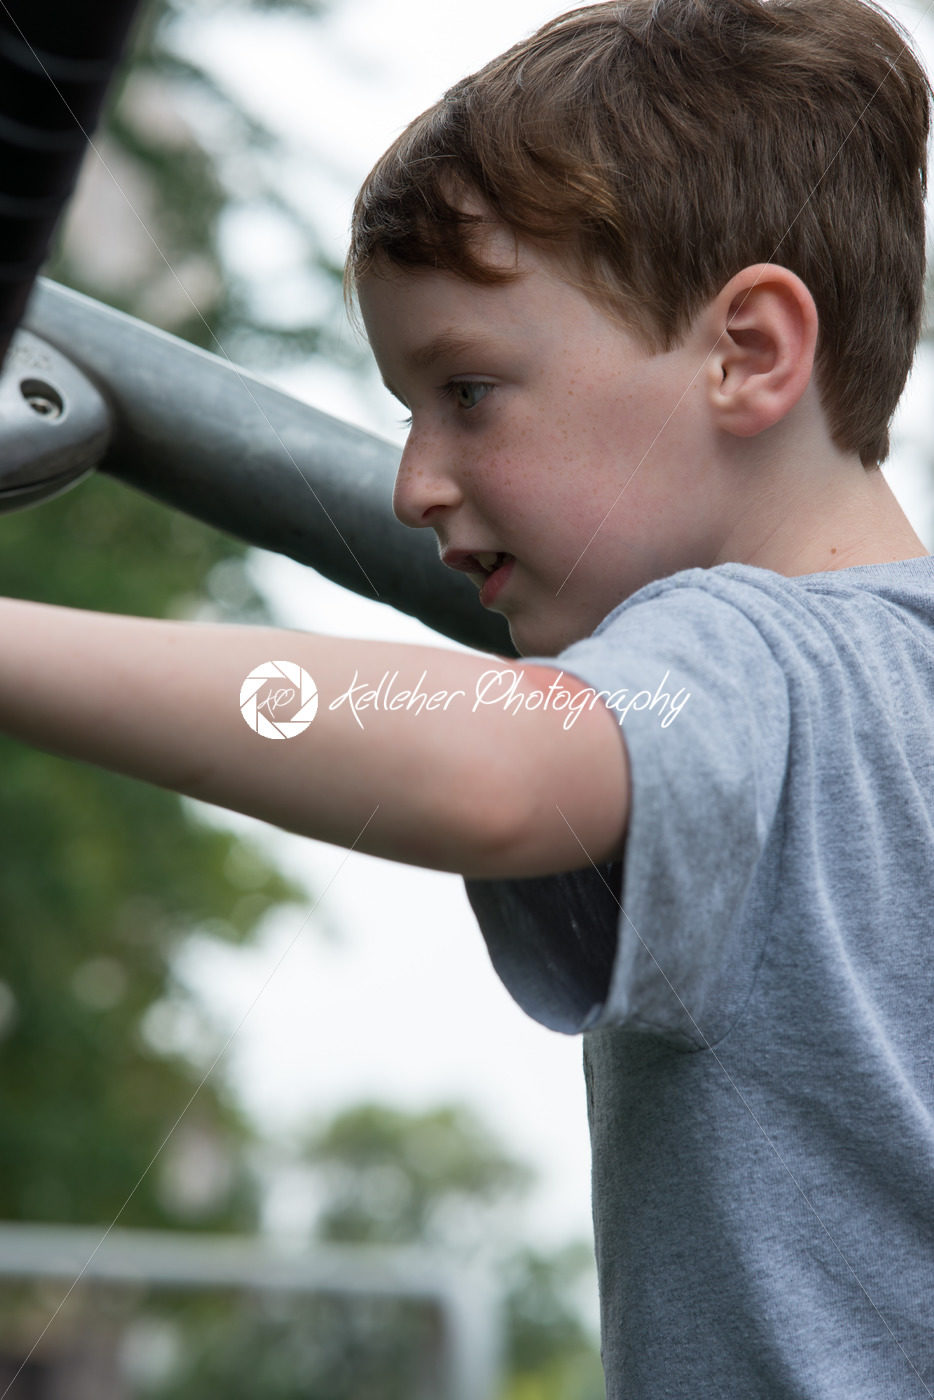 Young boy having fun outside at park on a playground climbing set - Kelleher Photography Store